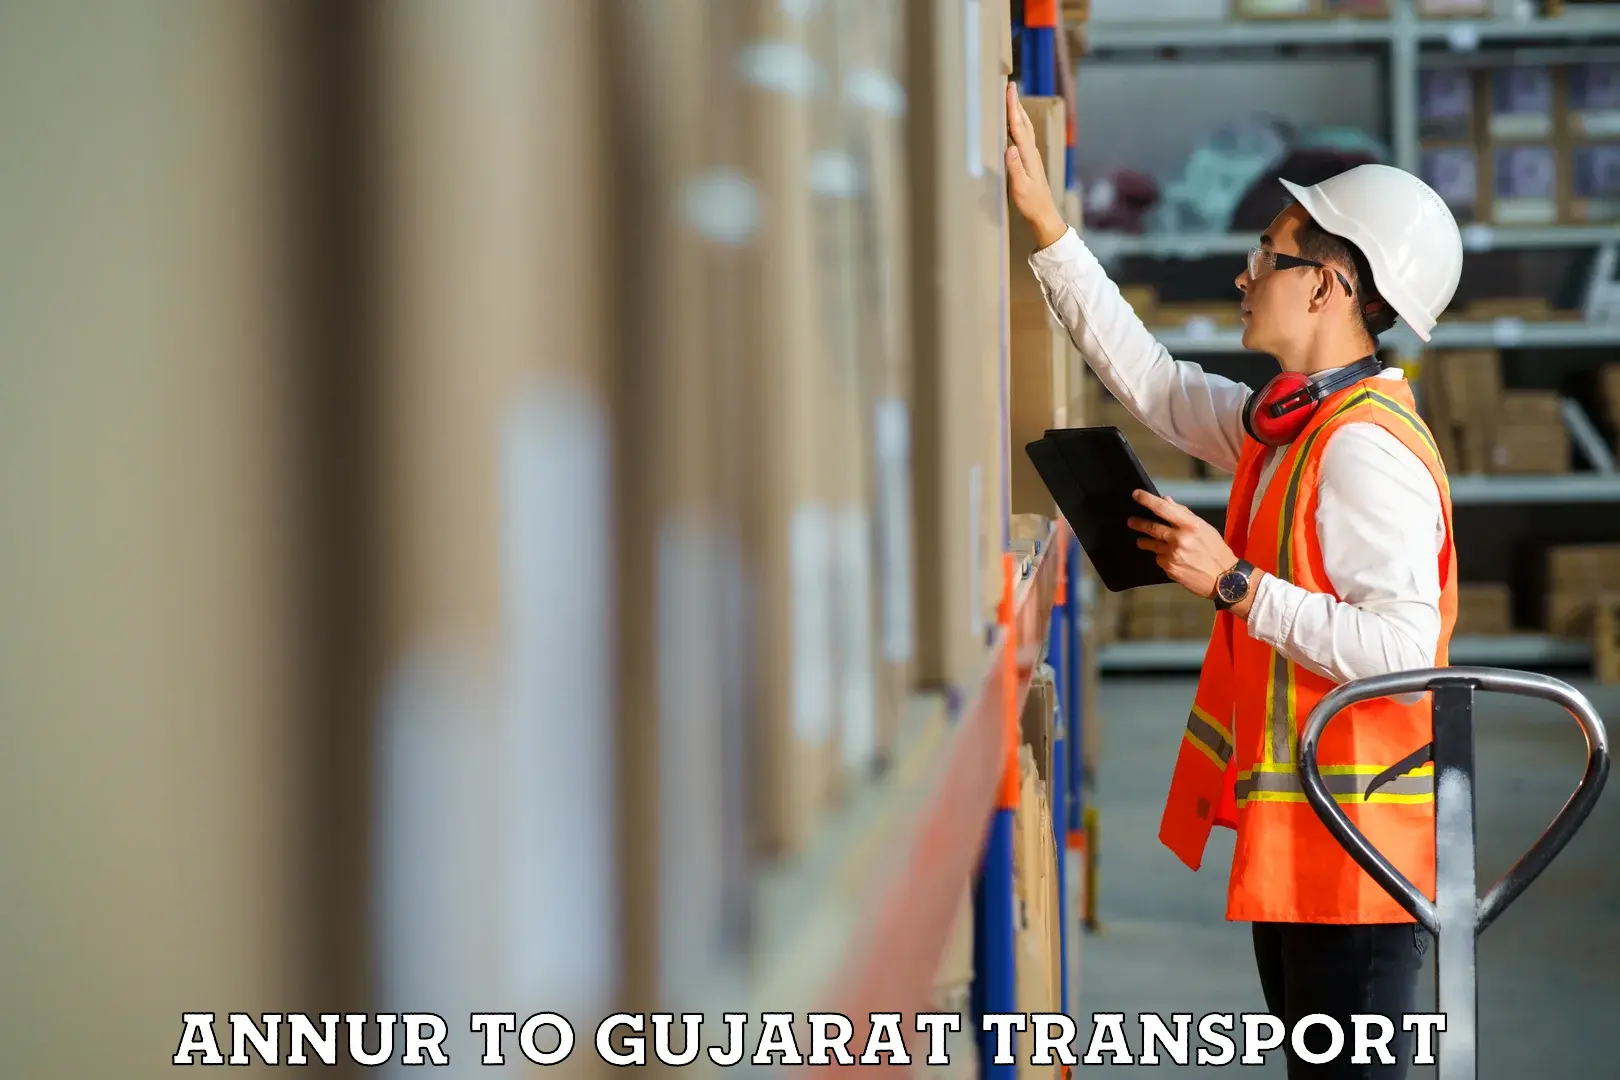 Truck transport companies in India Annur to Gujarat